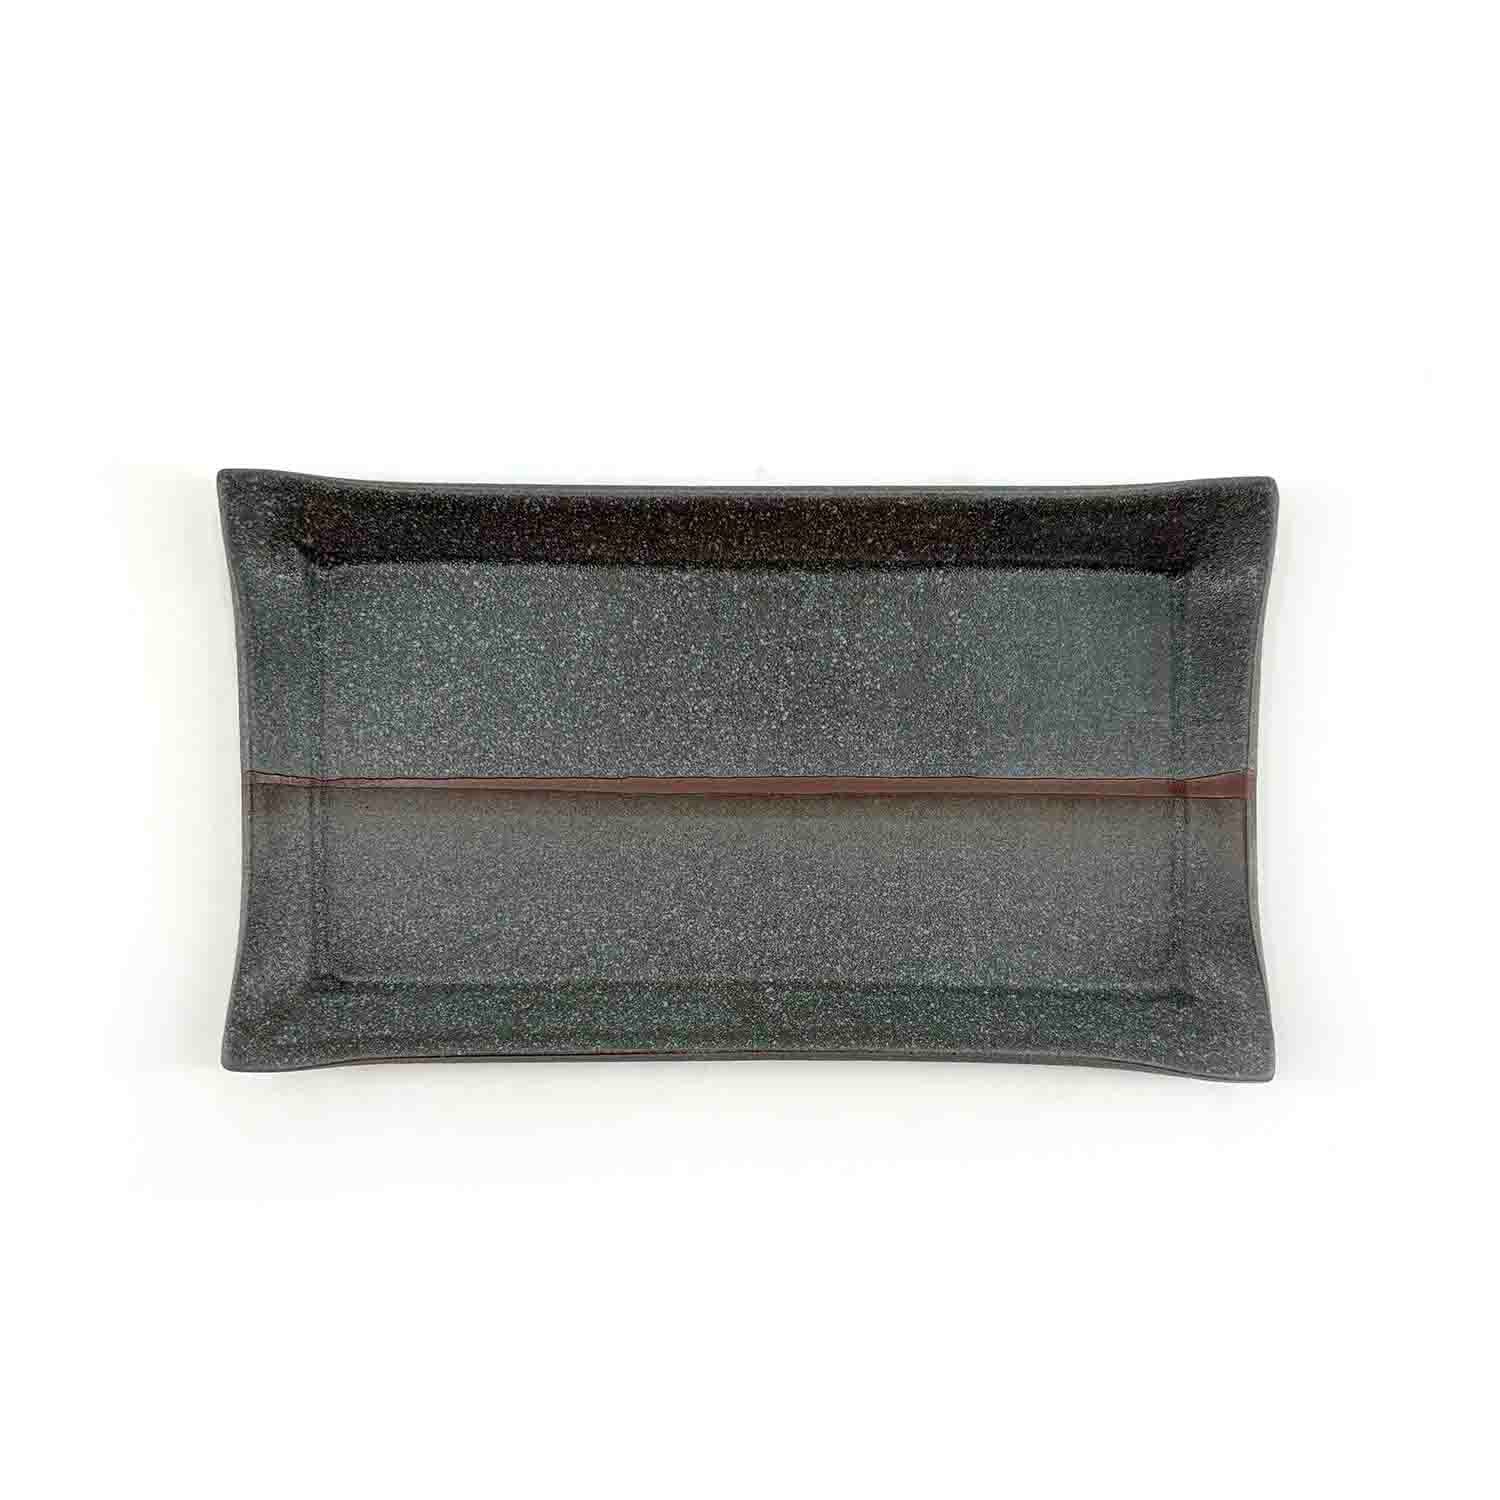 Petit plateau rectangulaire collection Mineral ONA MAATI